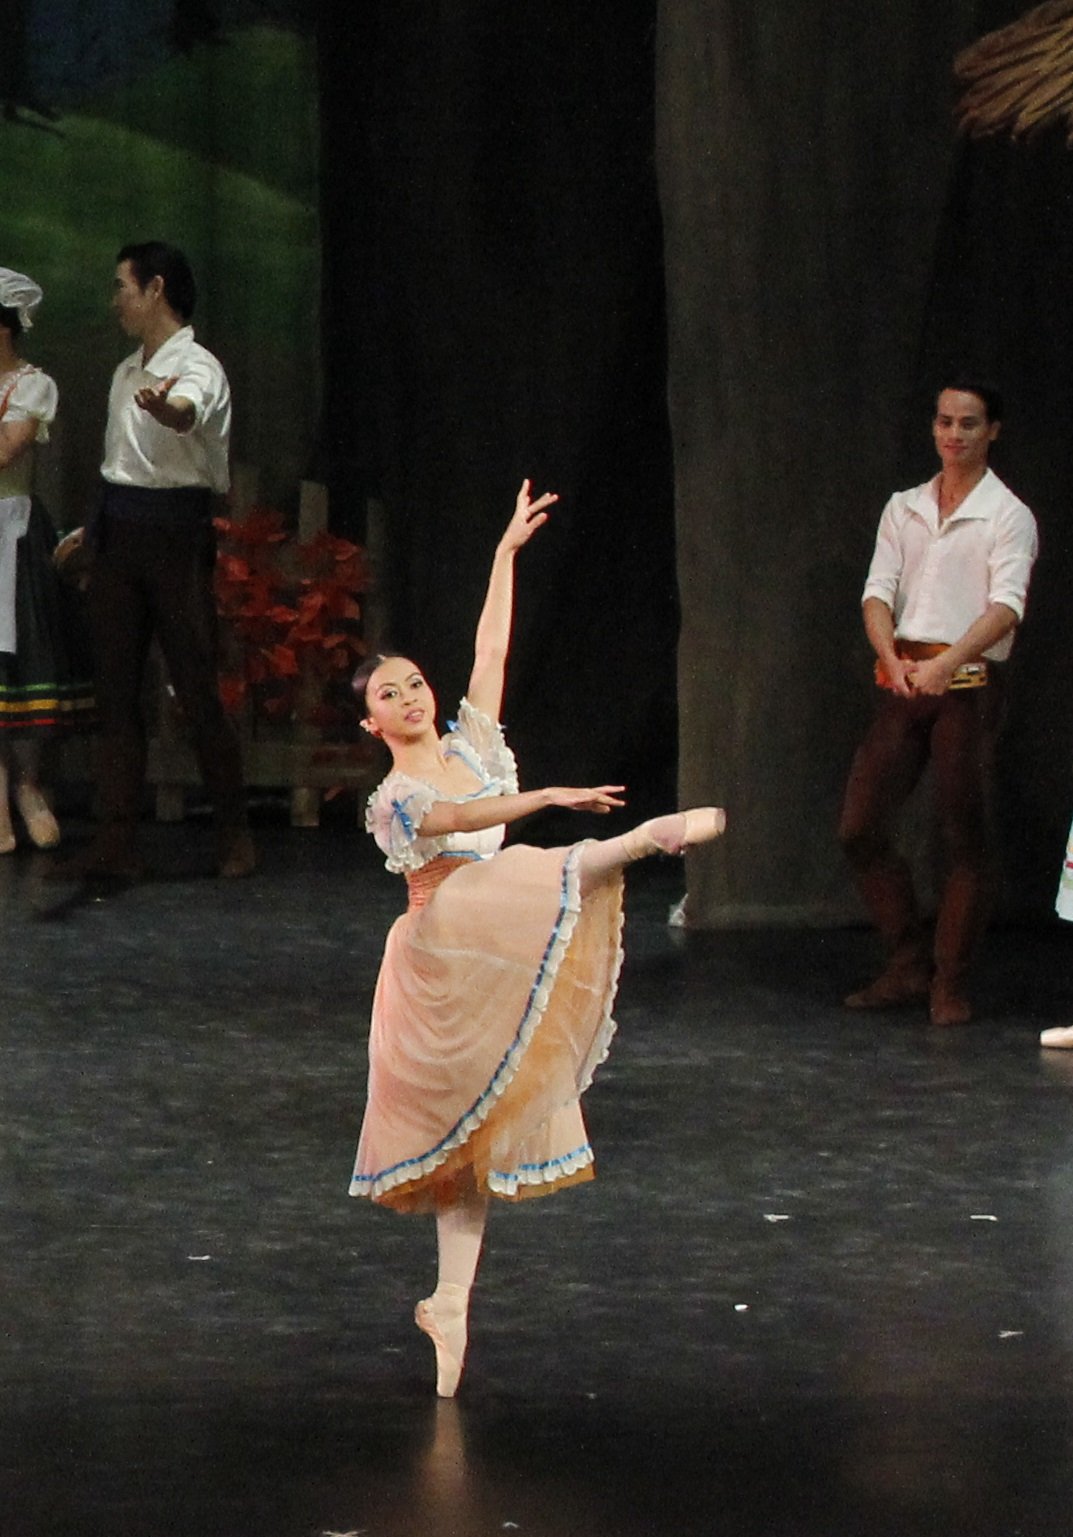    Everything’s peachy, literally, when Sofia Sangco-Peralta joins the community in a festive gathering in  Giselle  (2012). She and her friends opt for pastel colors, and hers just happens to be peach. Photo by Ocs Alvarez   